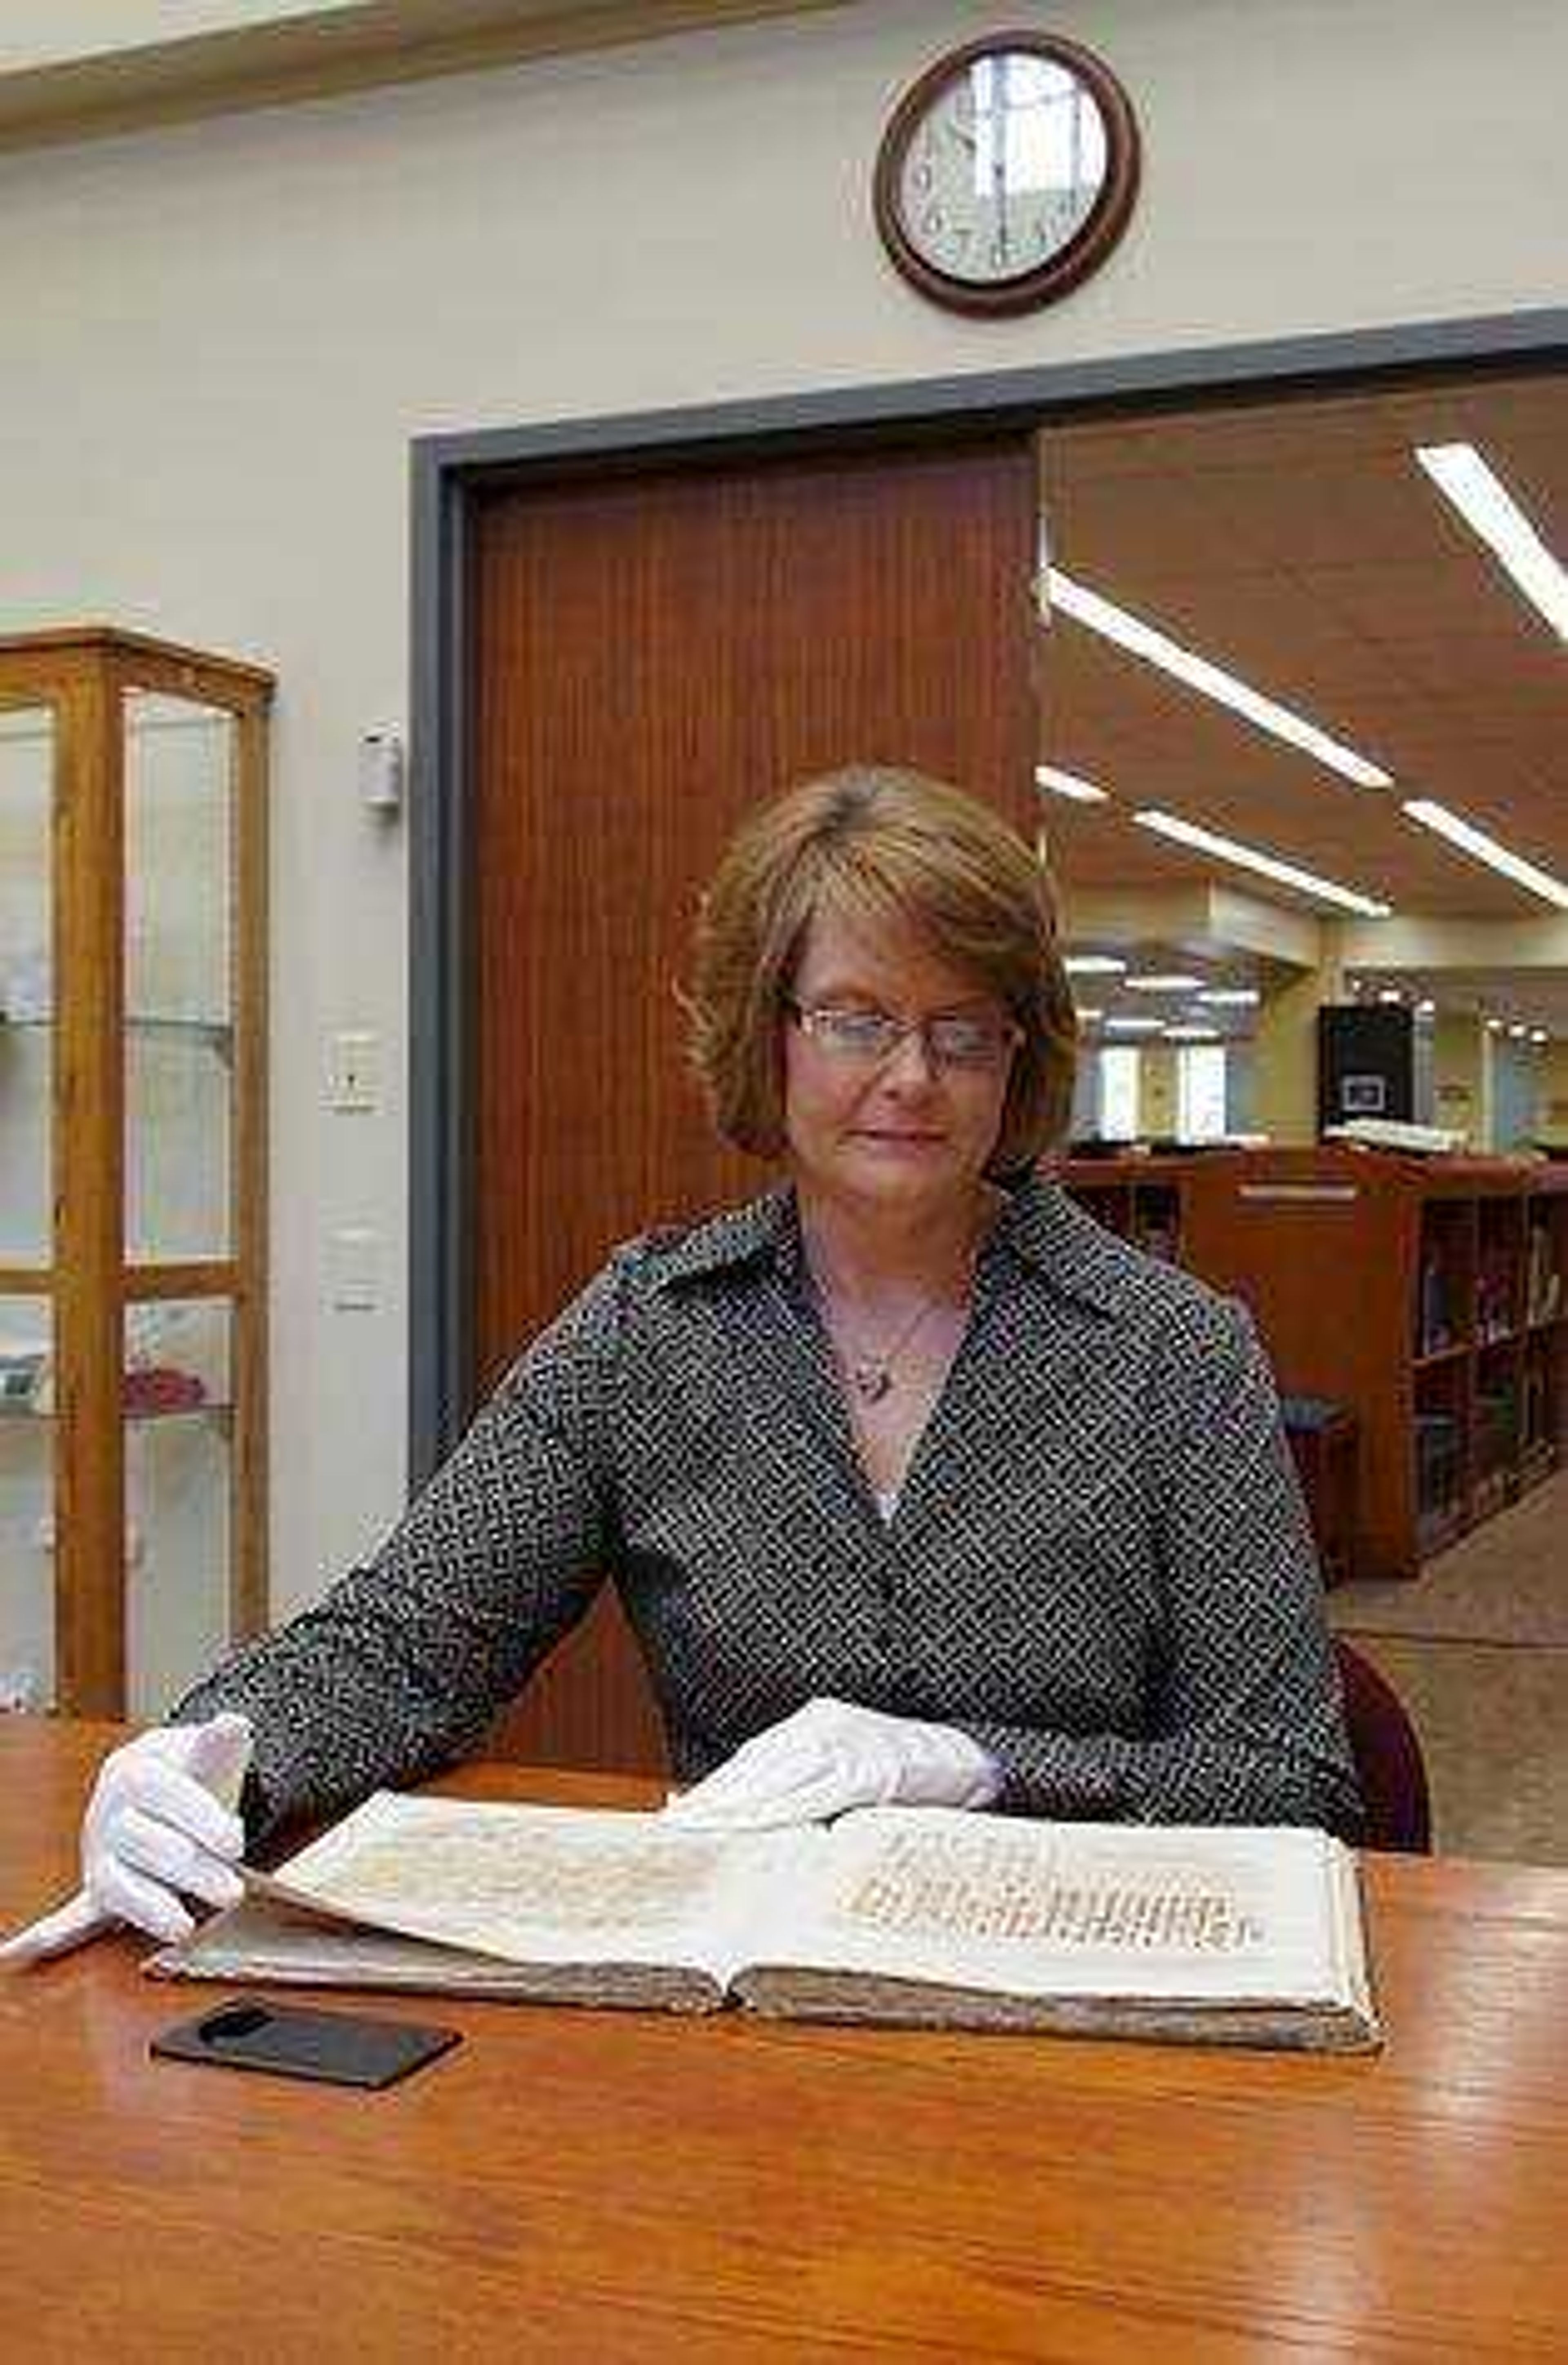 Kent Library archives received grants to digitize Civil War